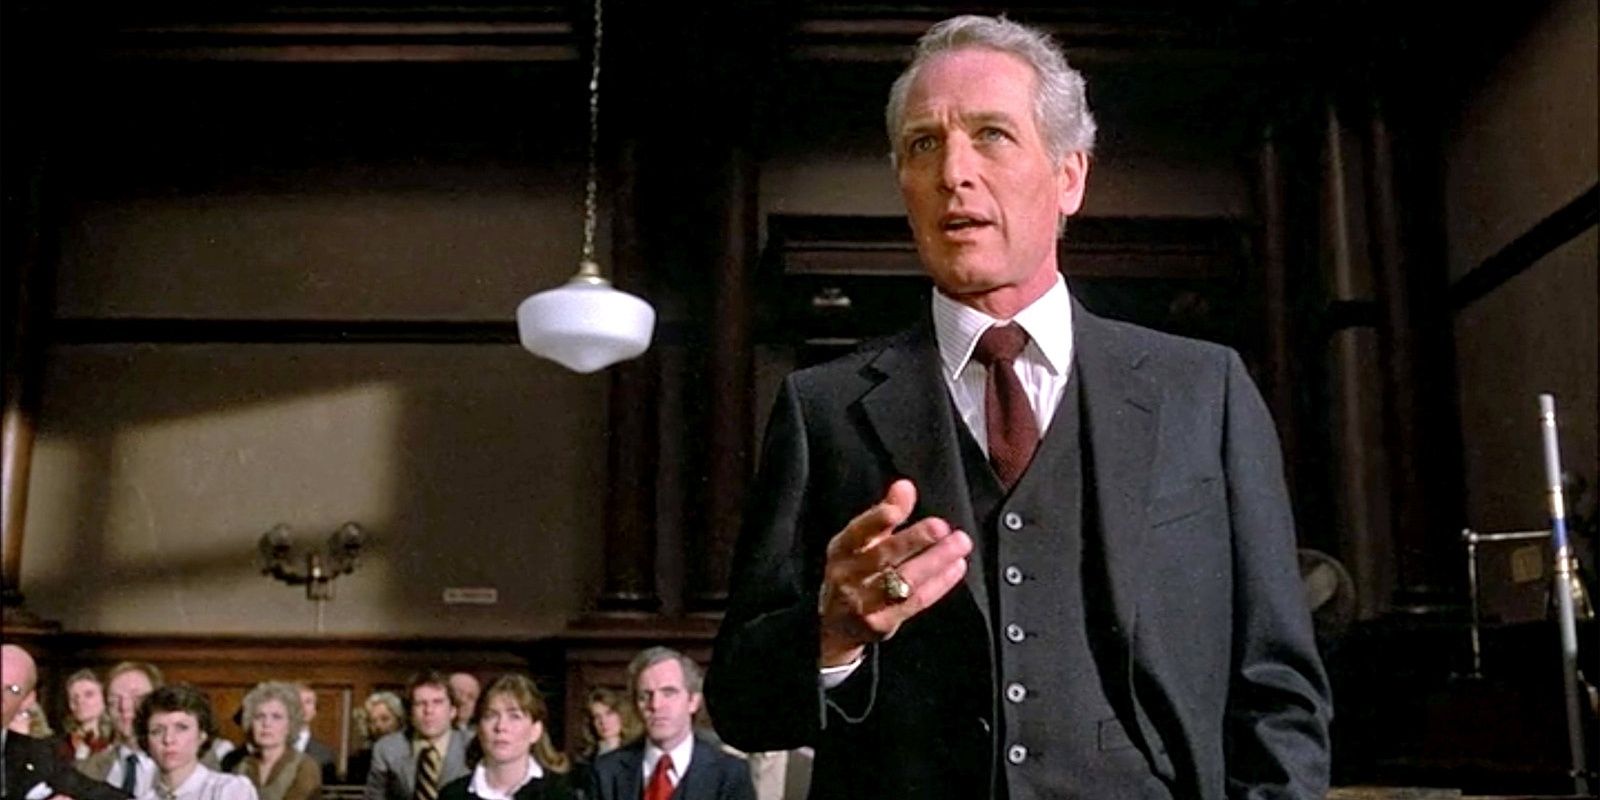 Paul Newman presenting an argument in front of the courtroom in The Verdict